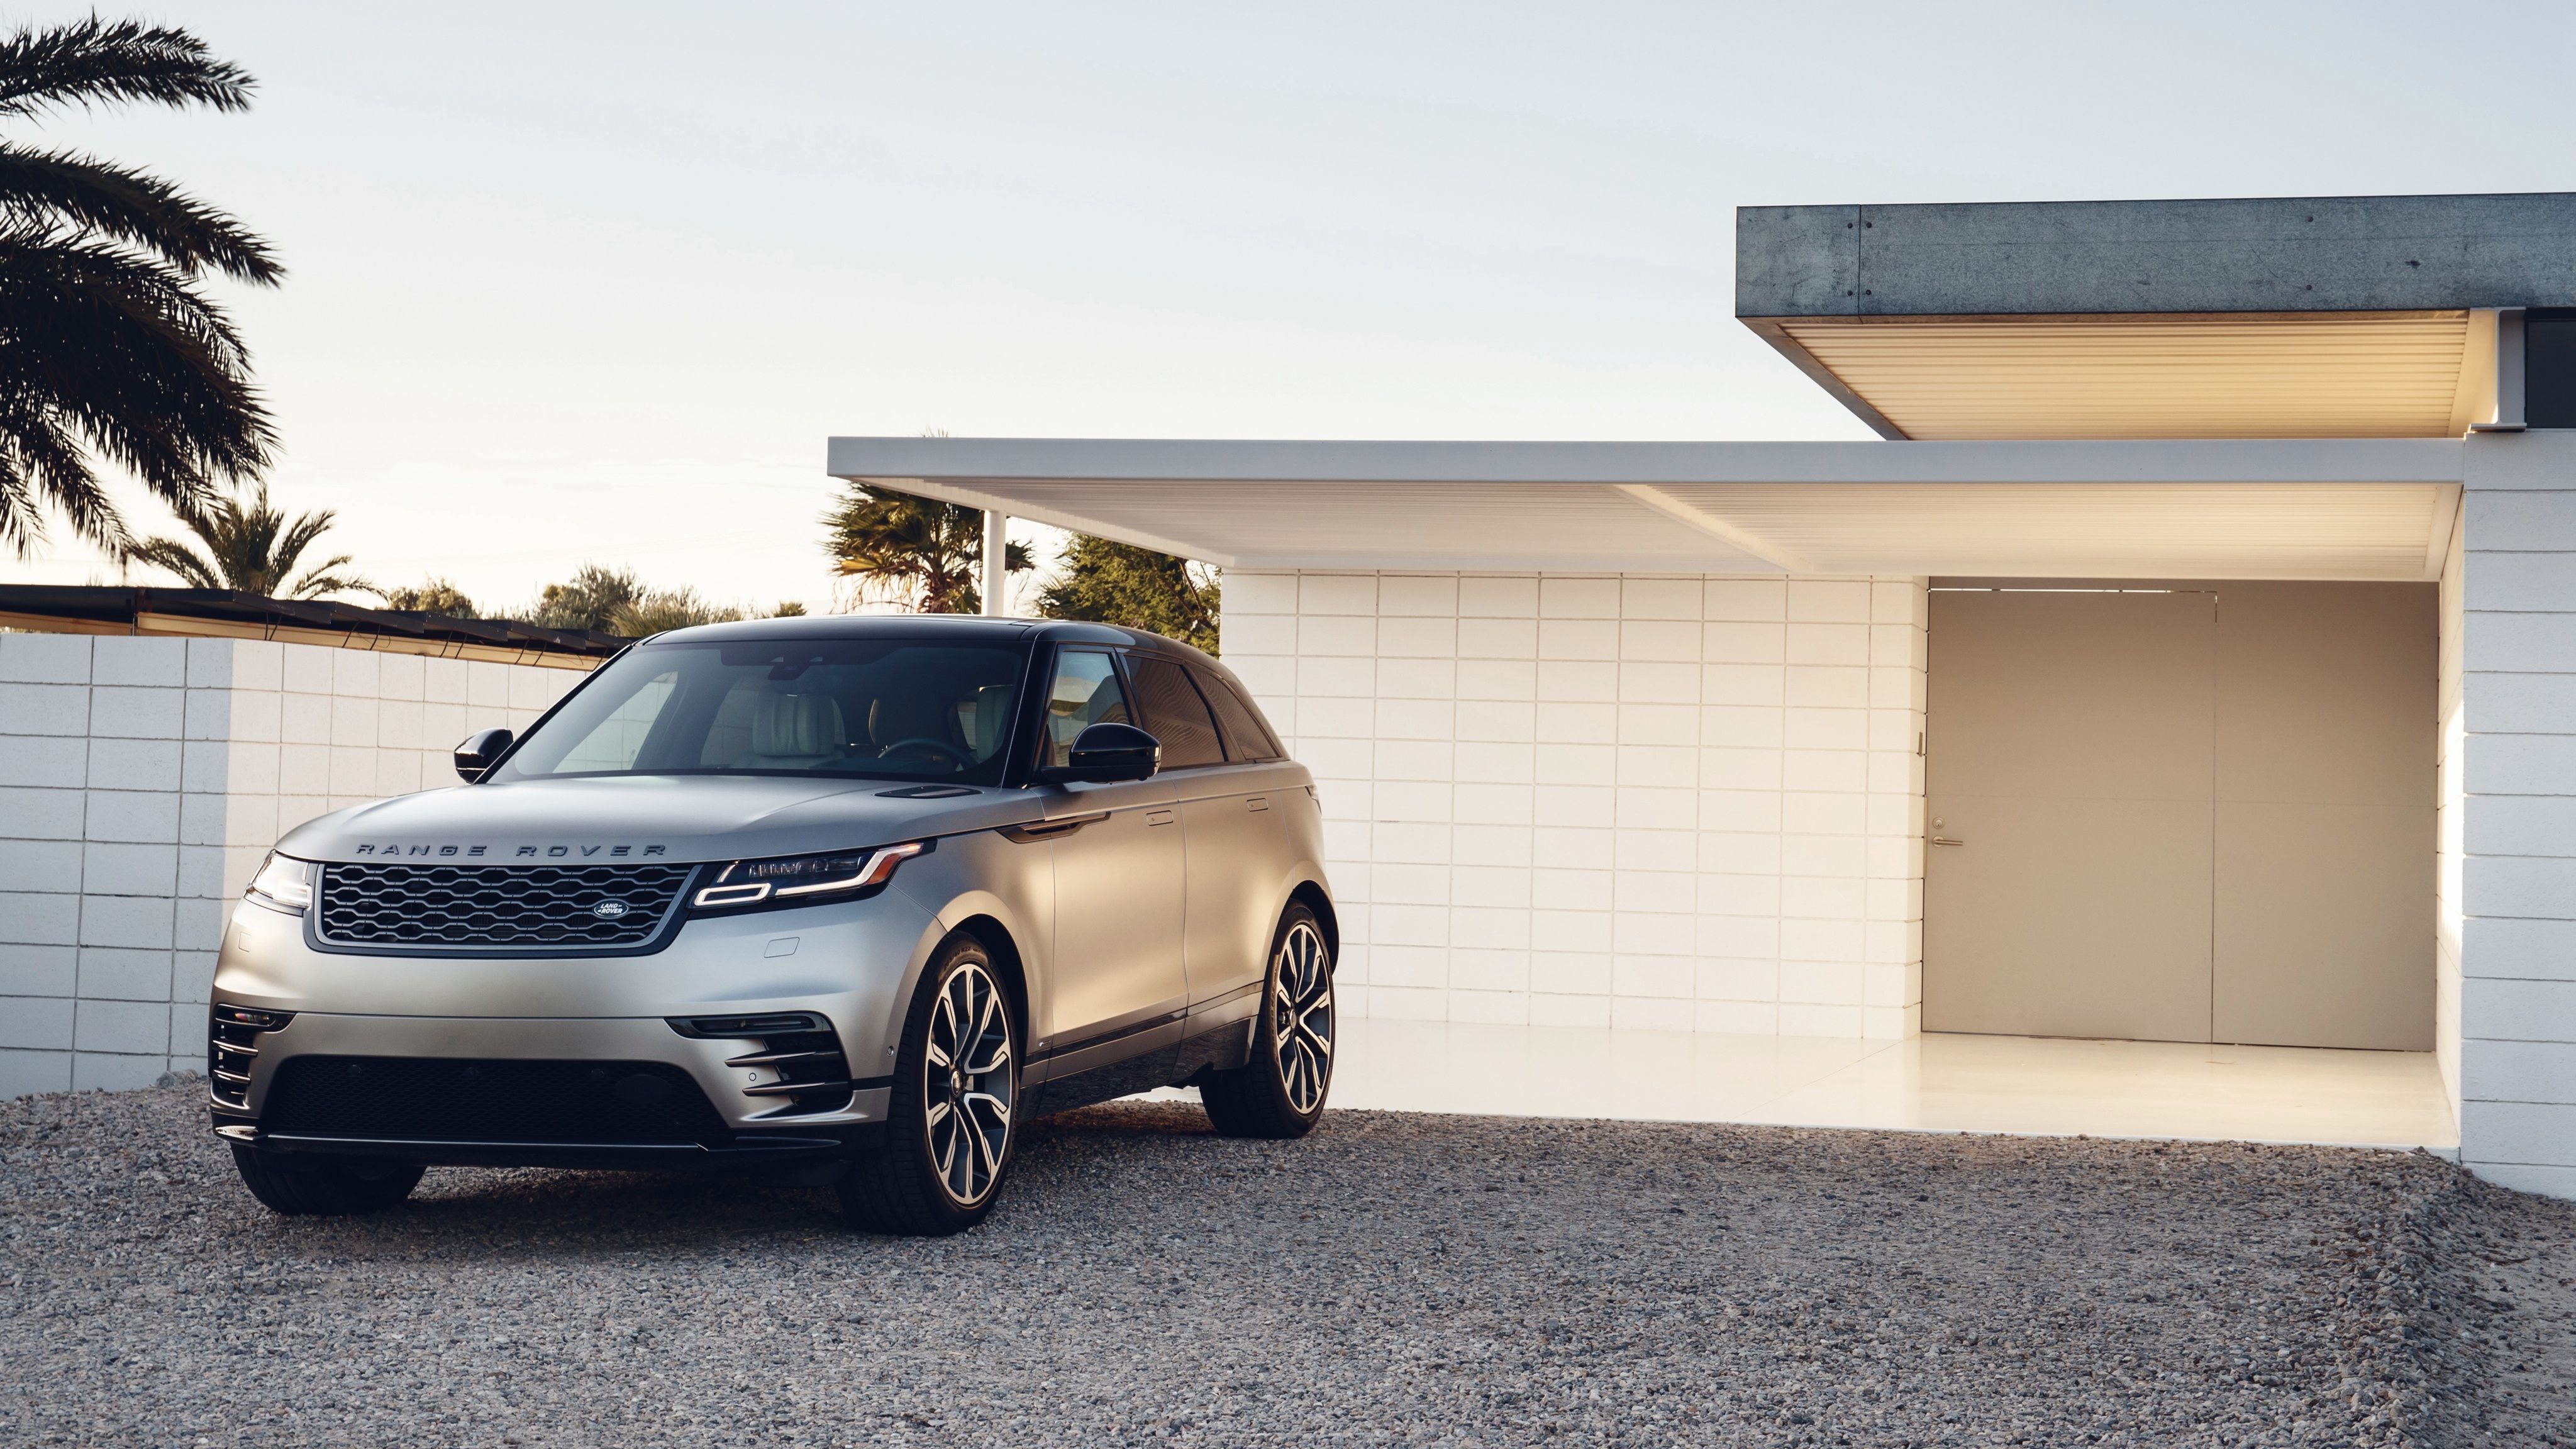 Download wallpaper Land Rover, Range Rover Velar, Dynamic, 4k, silver, new SUV, luxury cars, Range Rover for desktop with resolution 4096x2304. High Quality HD picture wallpaper